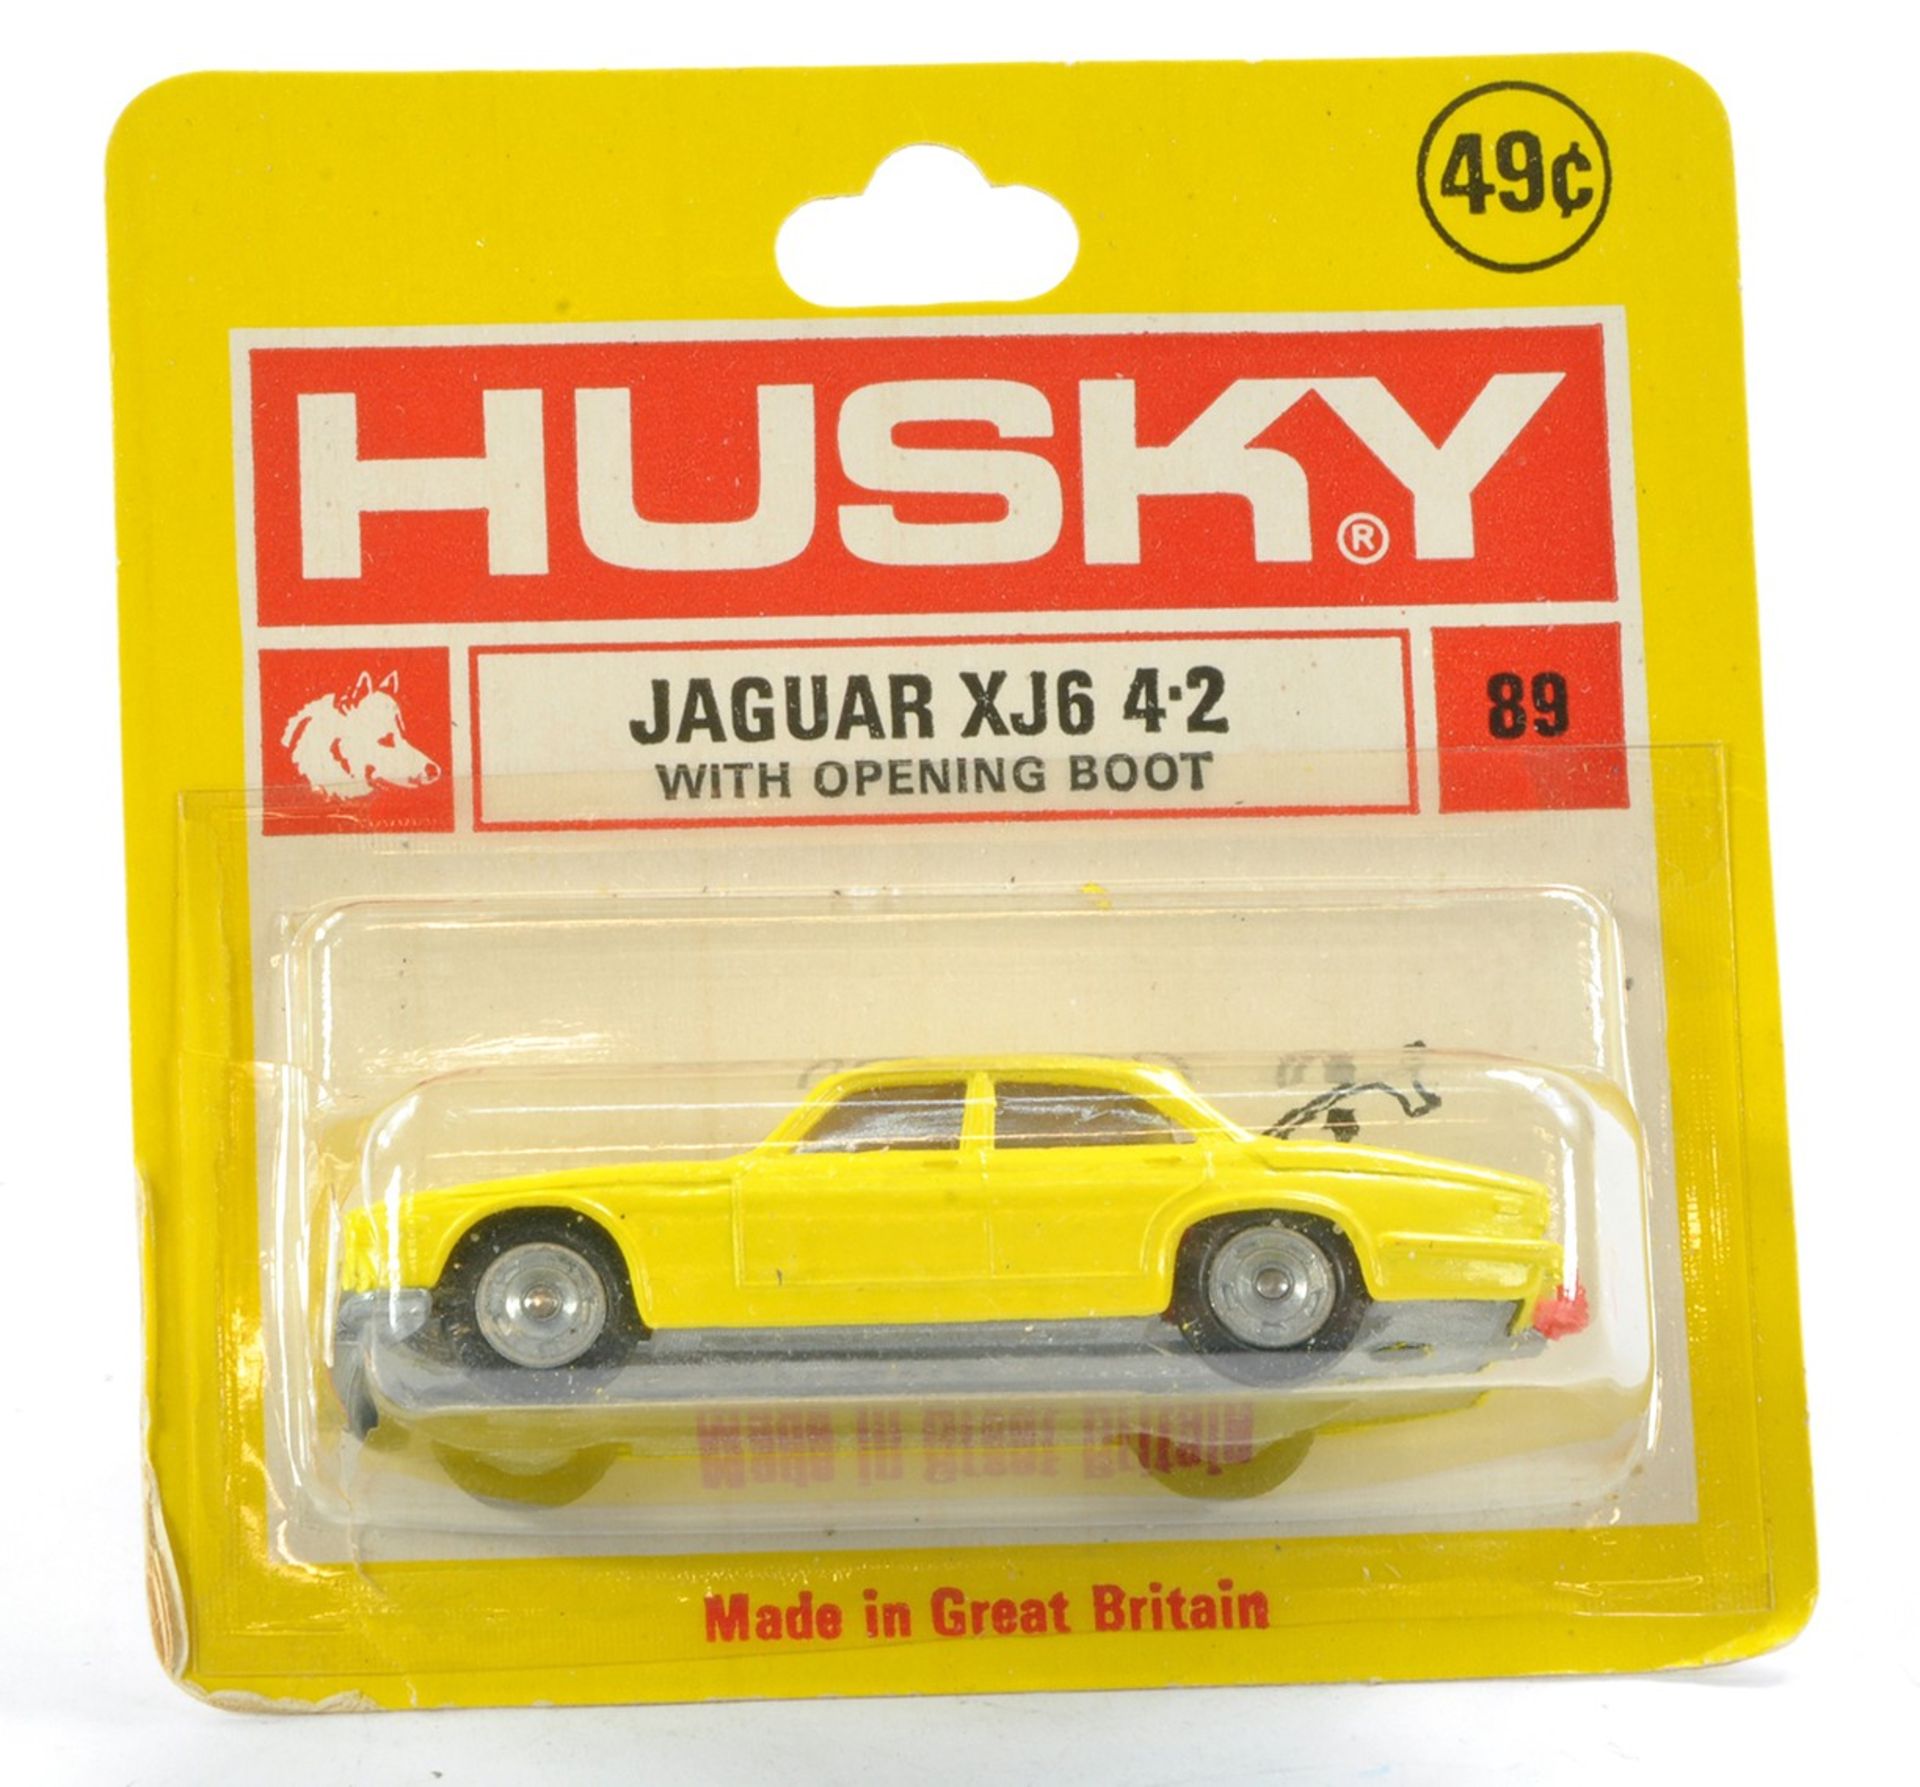 Husky No. 89 Jaguar XJ6. Yellow with red interior. Excellent, unopened card however bubble has crack